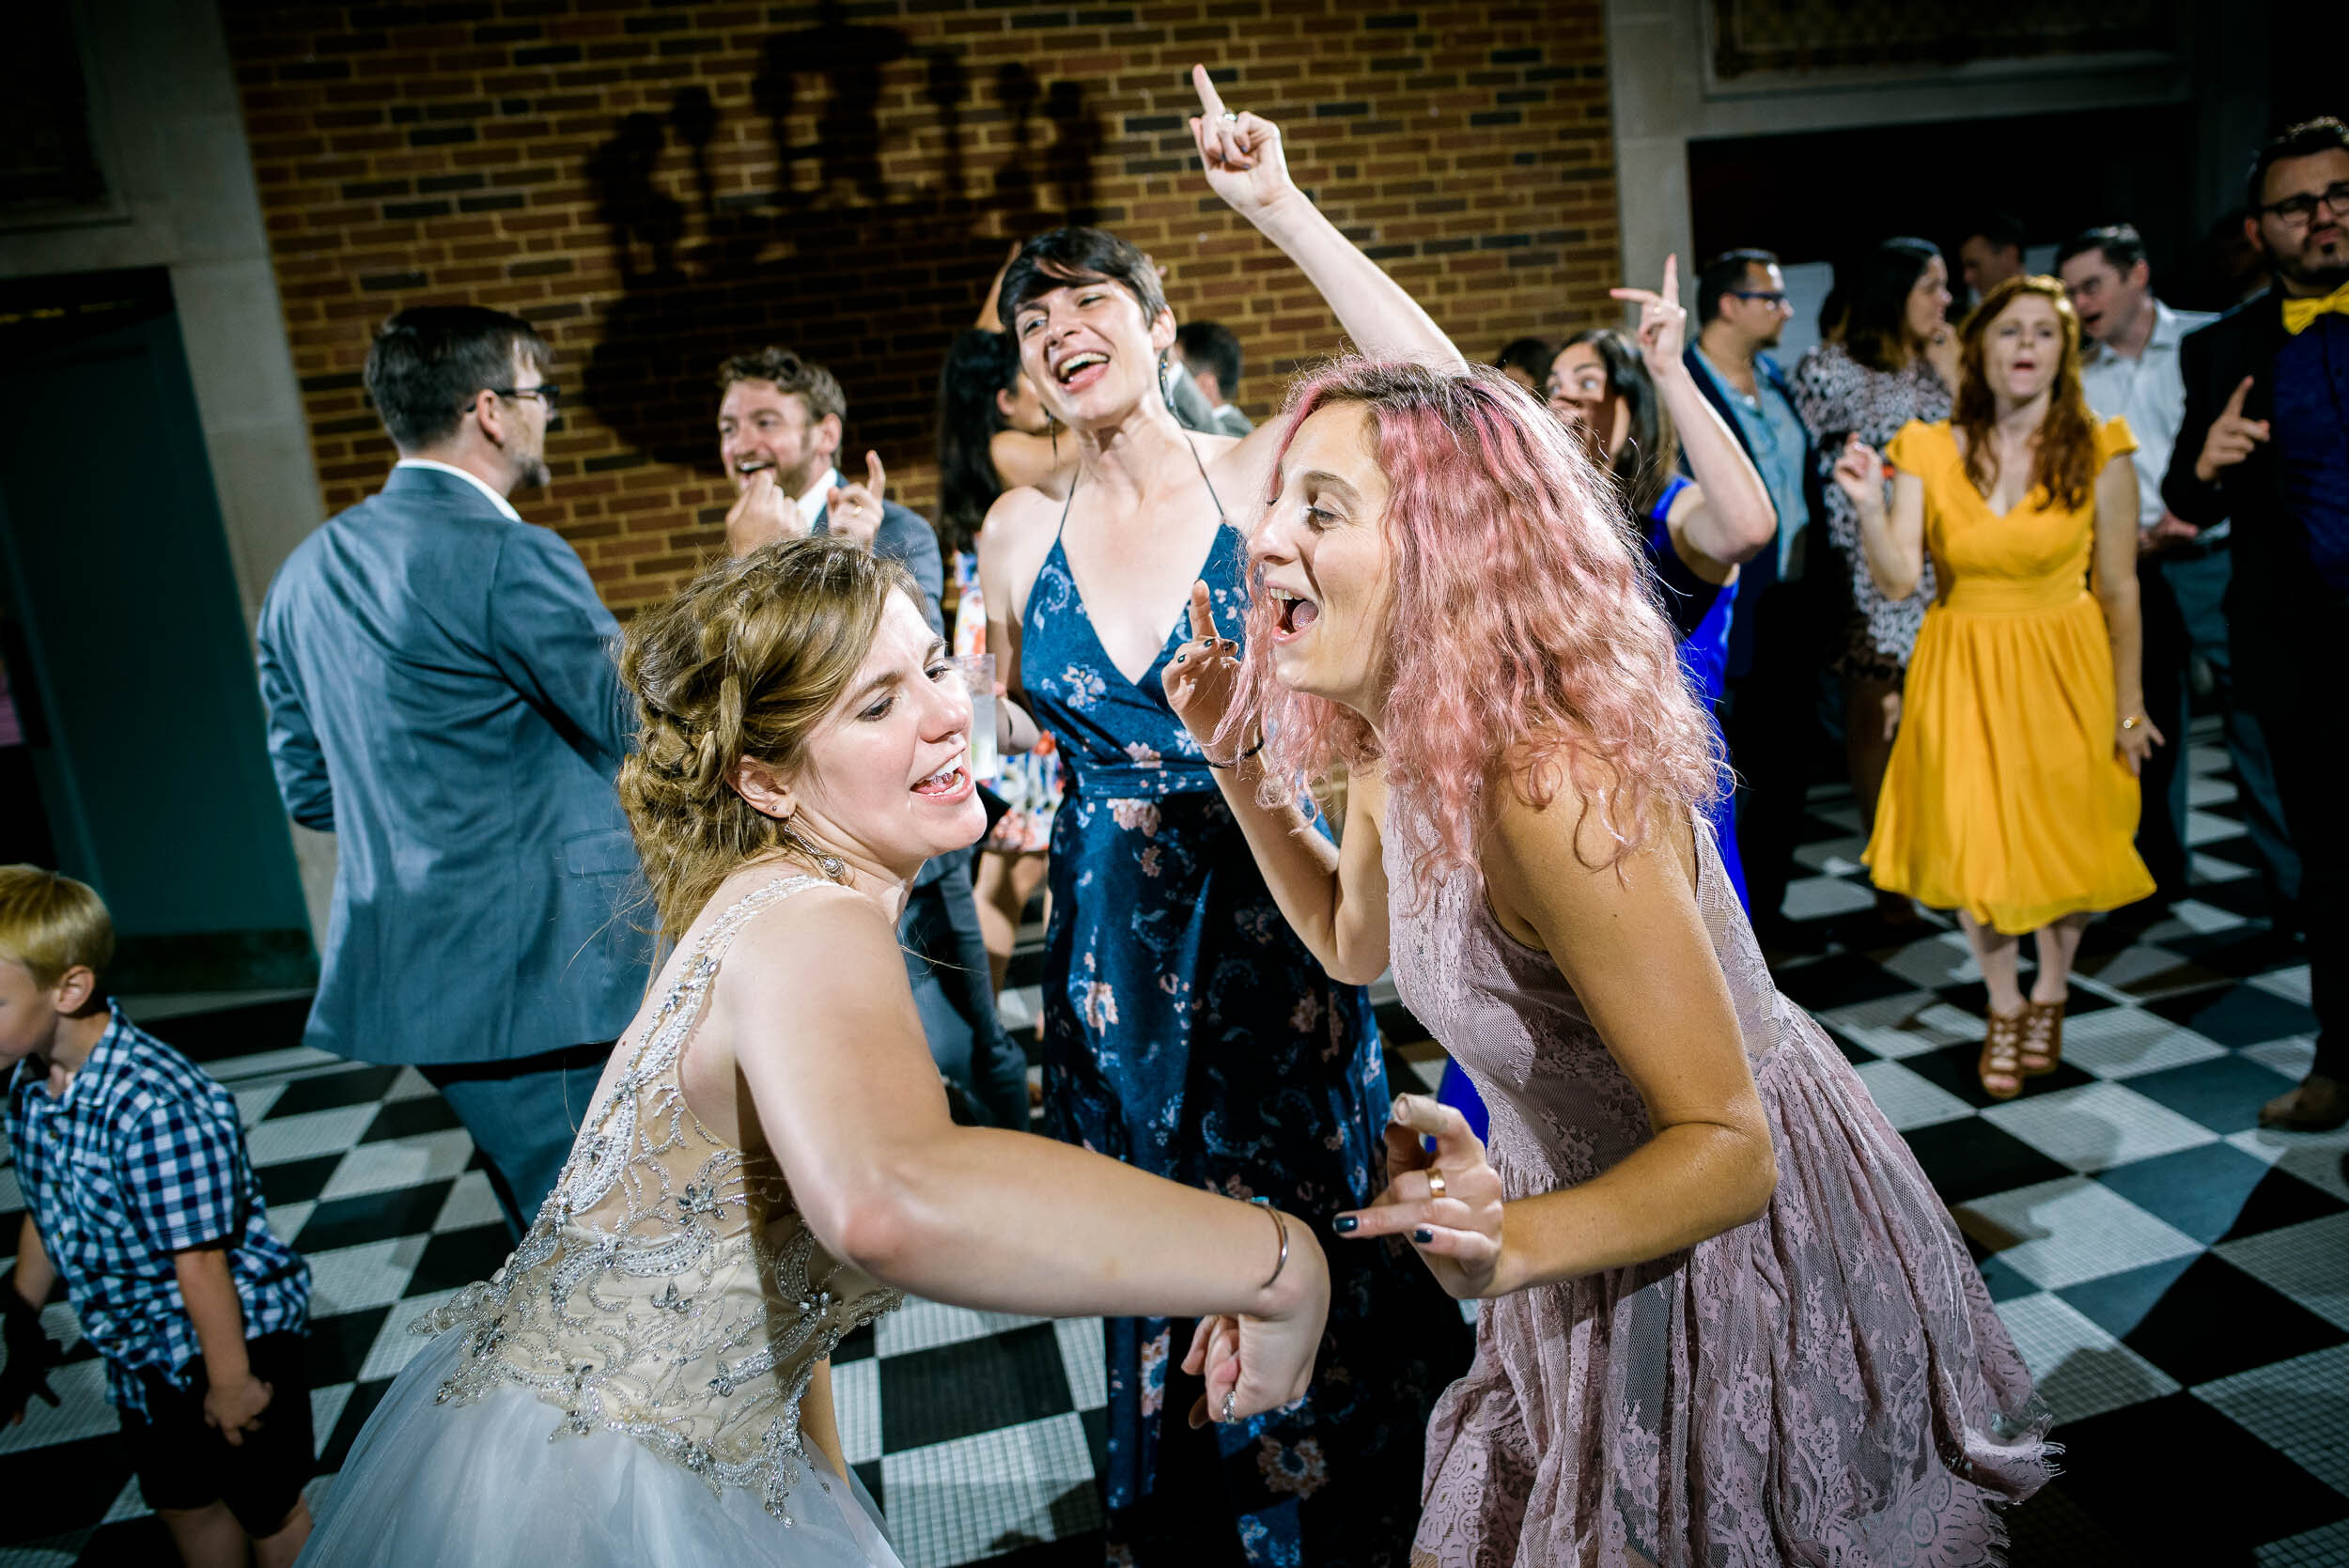 Fun wedding dancing photo: Columbus Park Refectory Chicago wedding captured by J. Brown Photography.